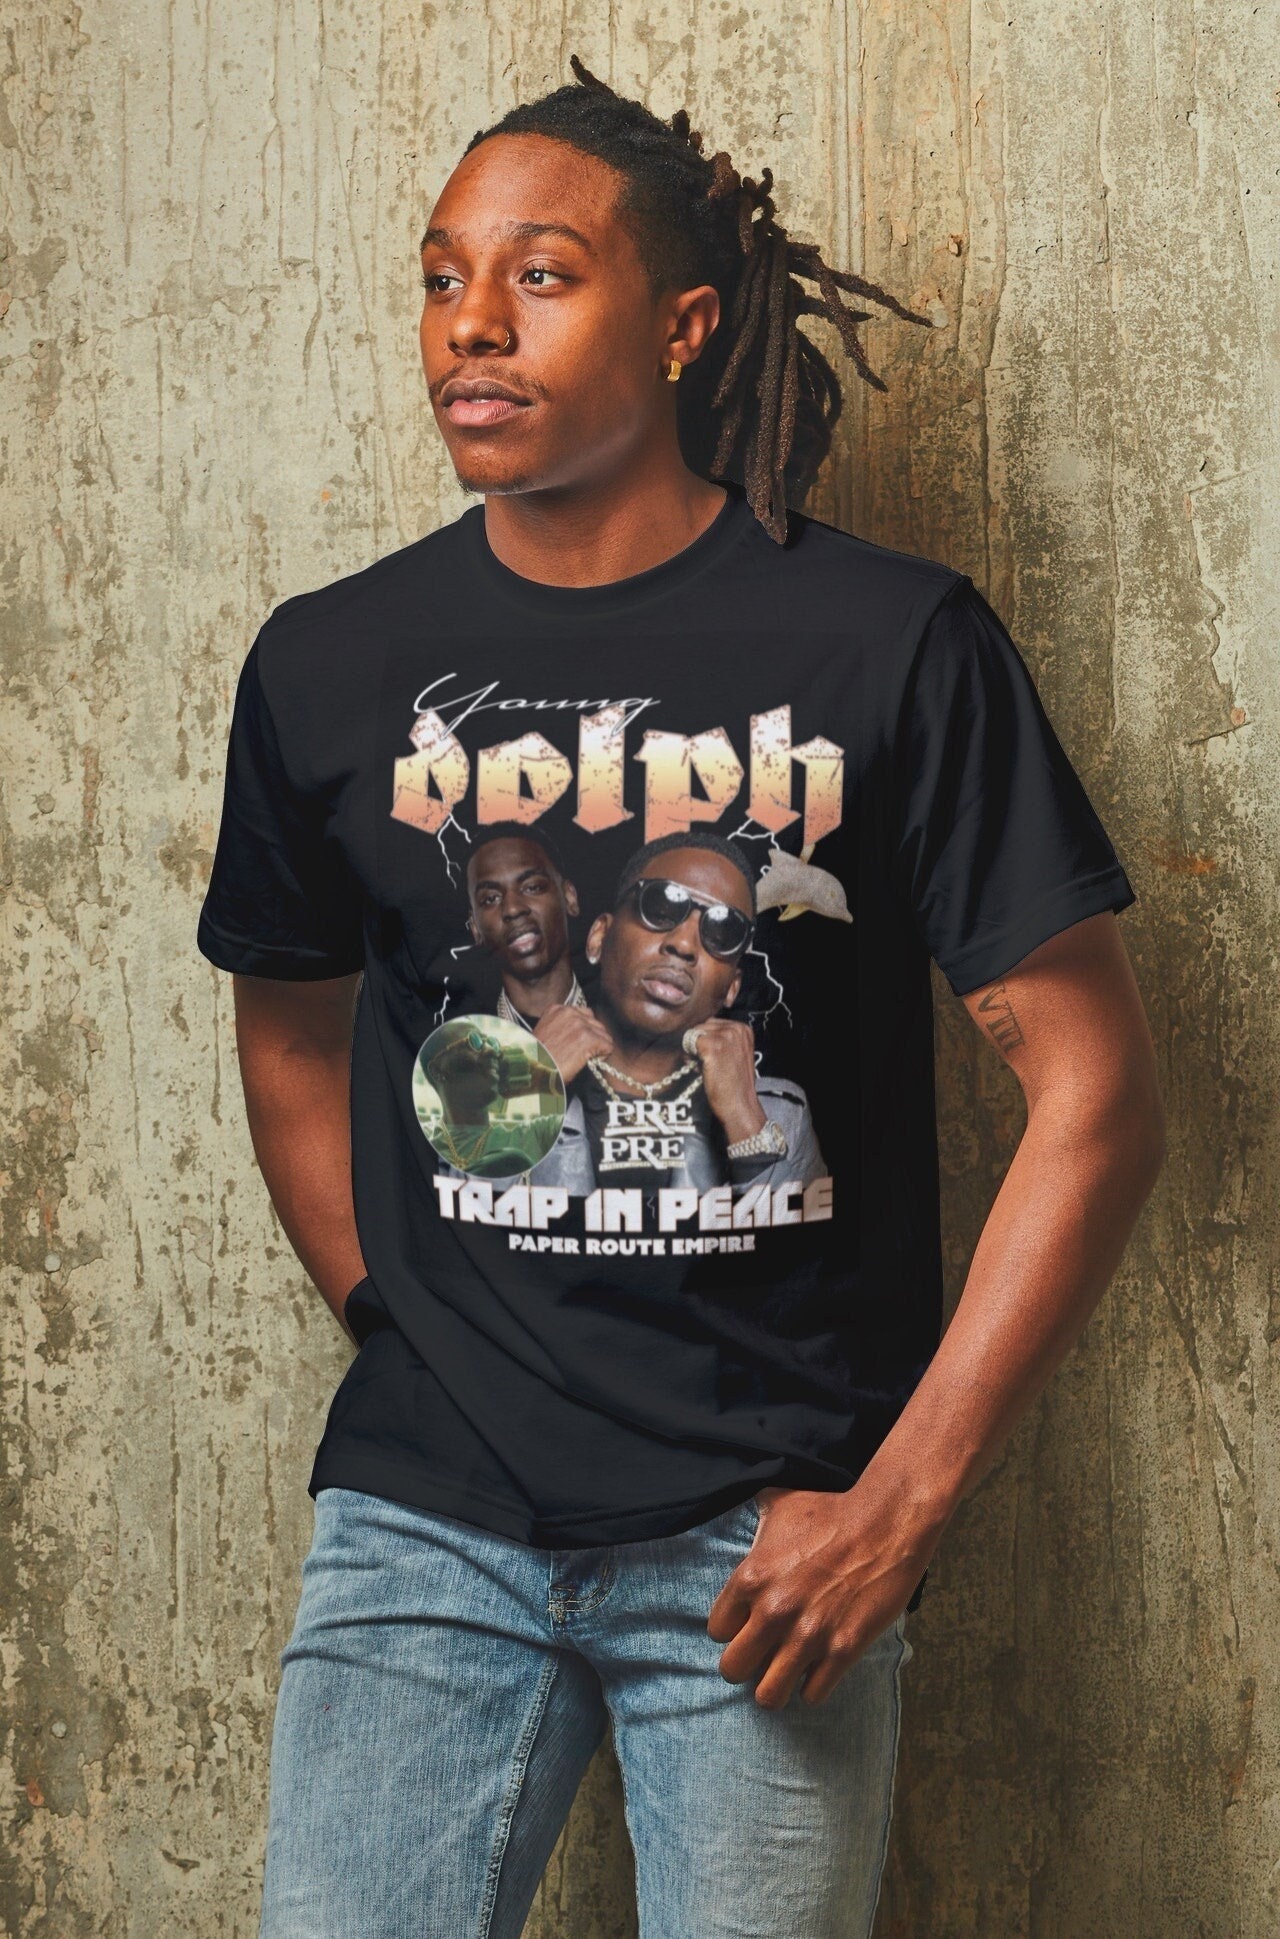 Discover RIP Young dolph shirt, Young dolph memorial shirt